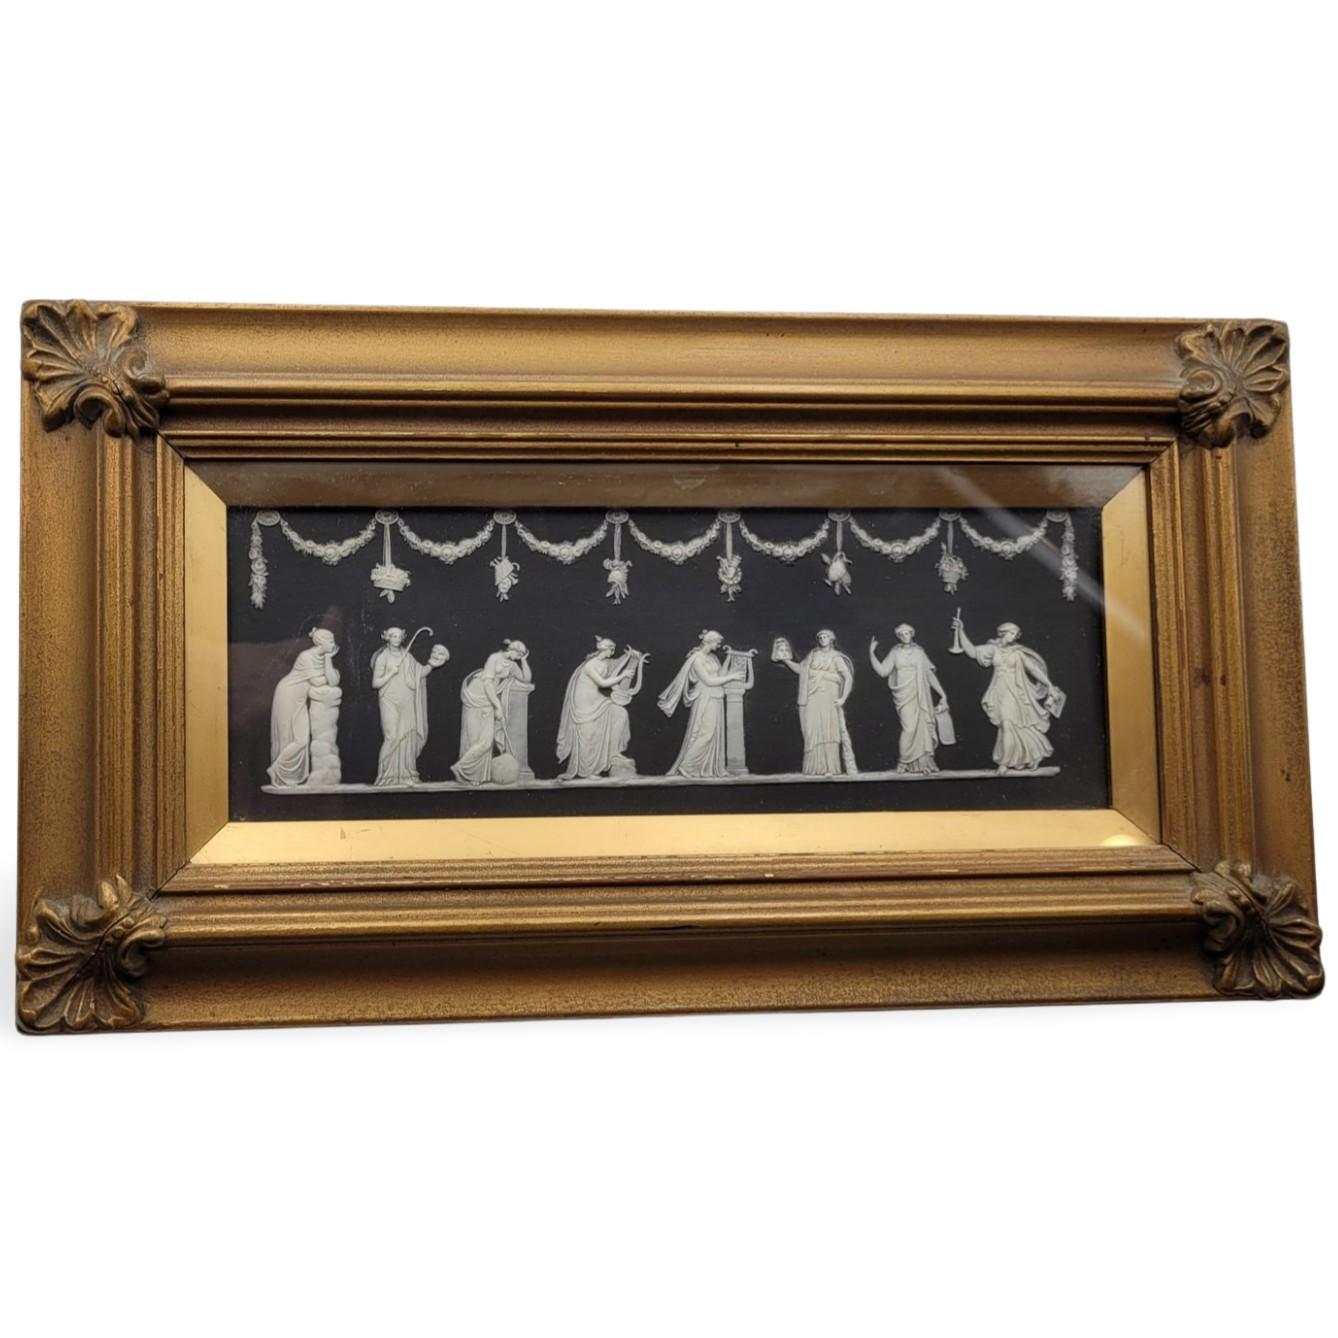 Plaque in solid black jasperware, decorated with eight of the nine muses:

Polyhymnia - The muse of sacred poetry, hymn, and eloquence as well as agriculture and pantomime. She represents deep contemplation and sacred hymns.
Thalia - The muse of